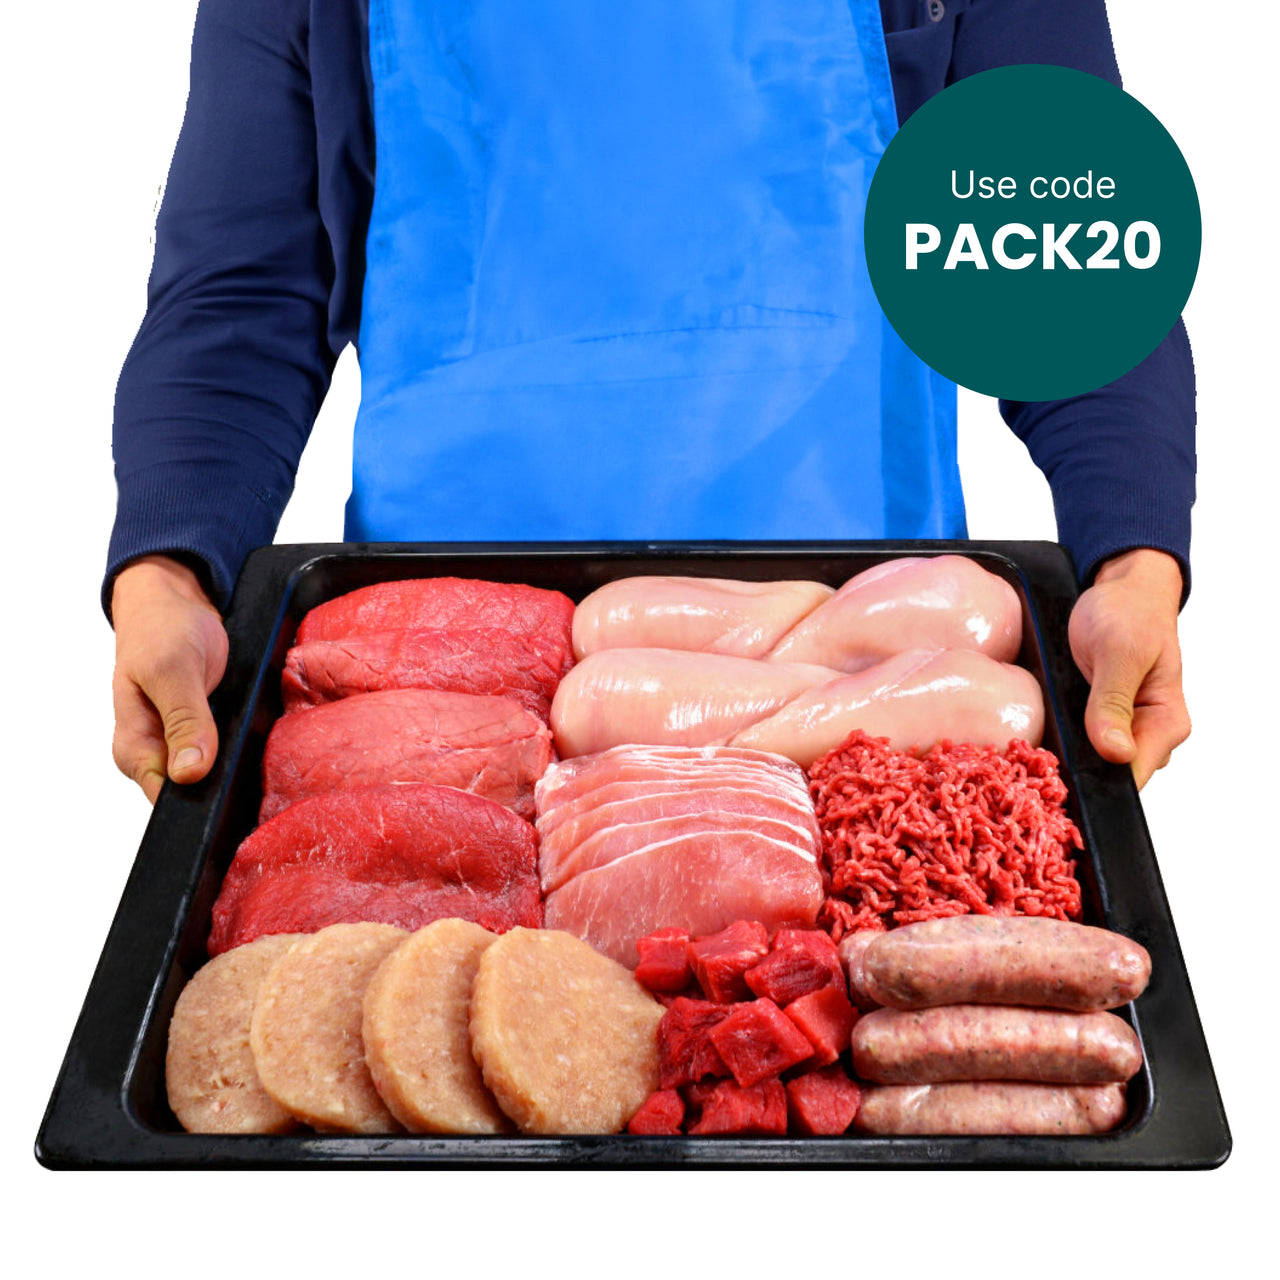 £20 Essential butchers pack